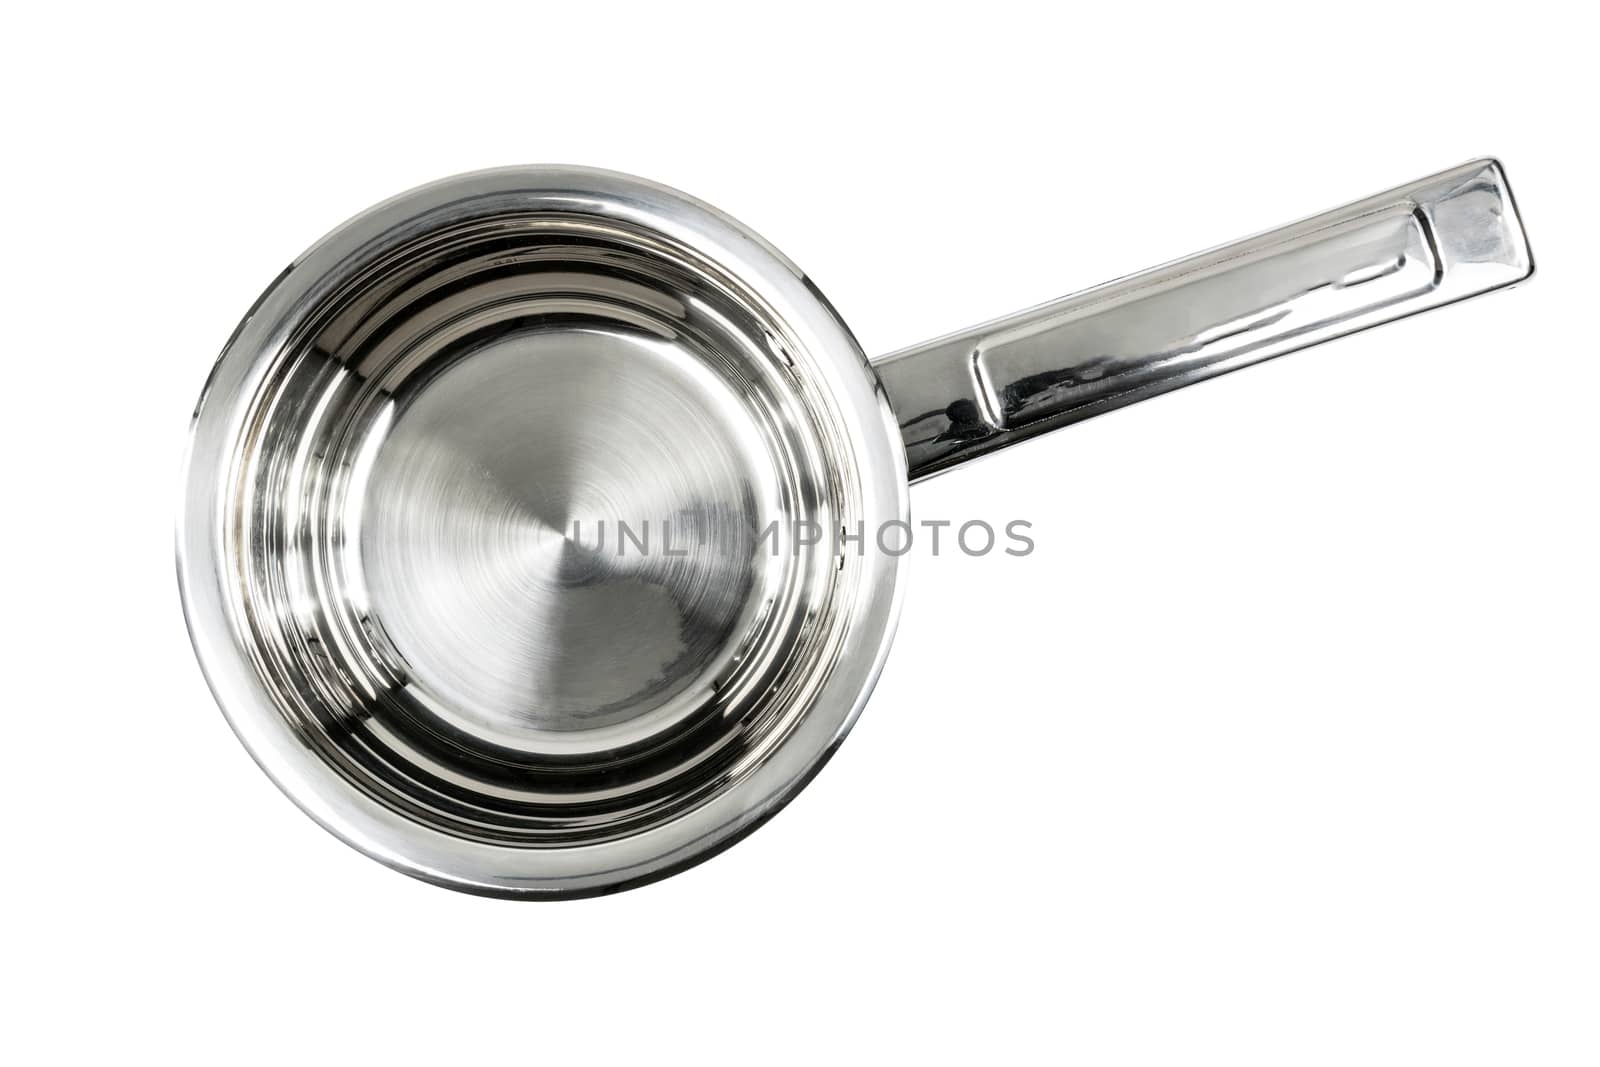 Top view of a professional stainless steel metal cooking pan isolated on a white background.